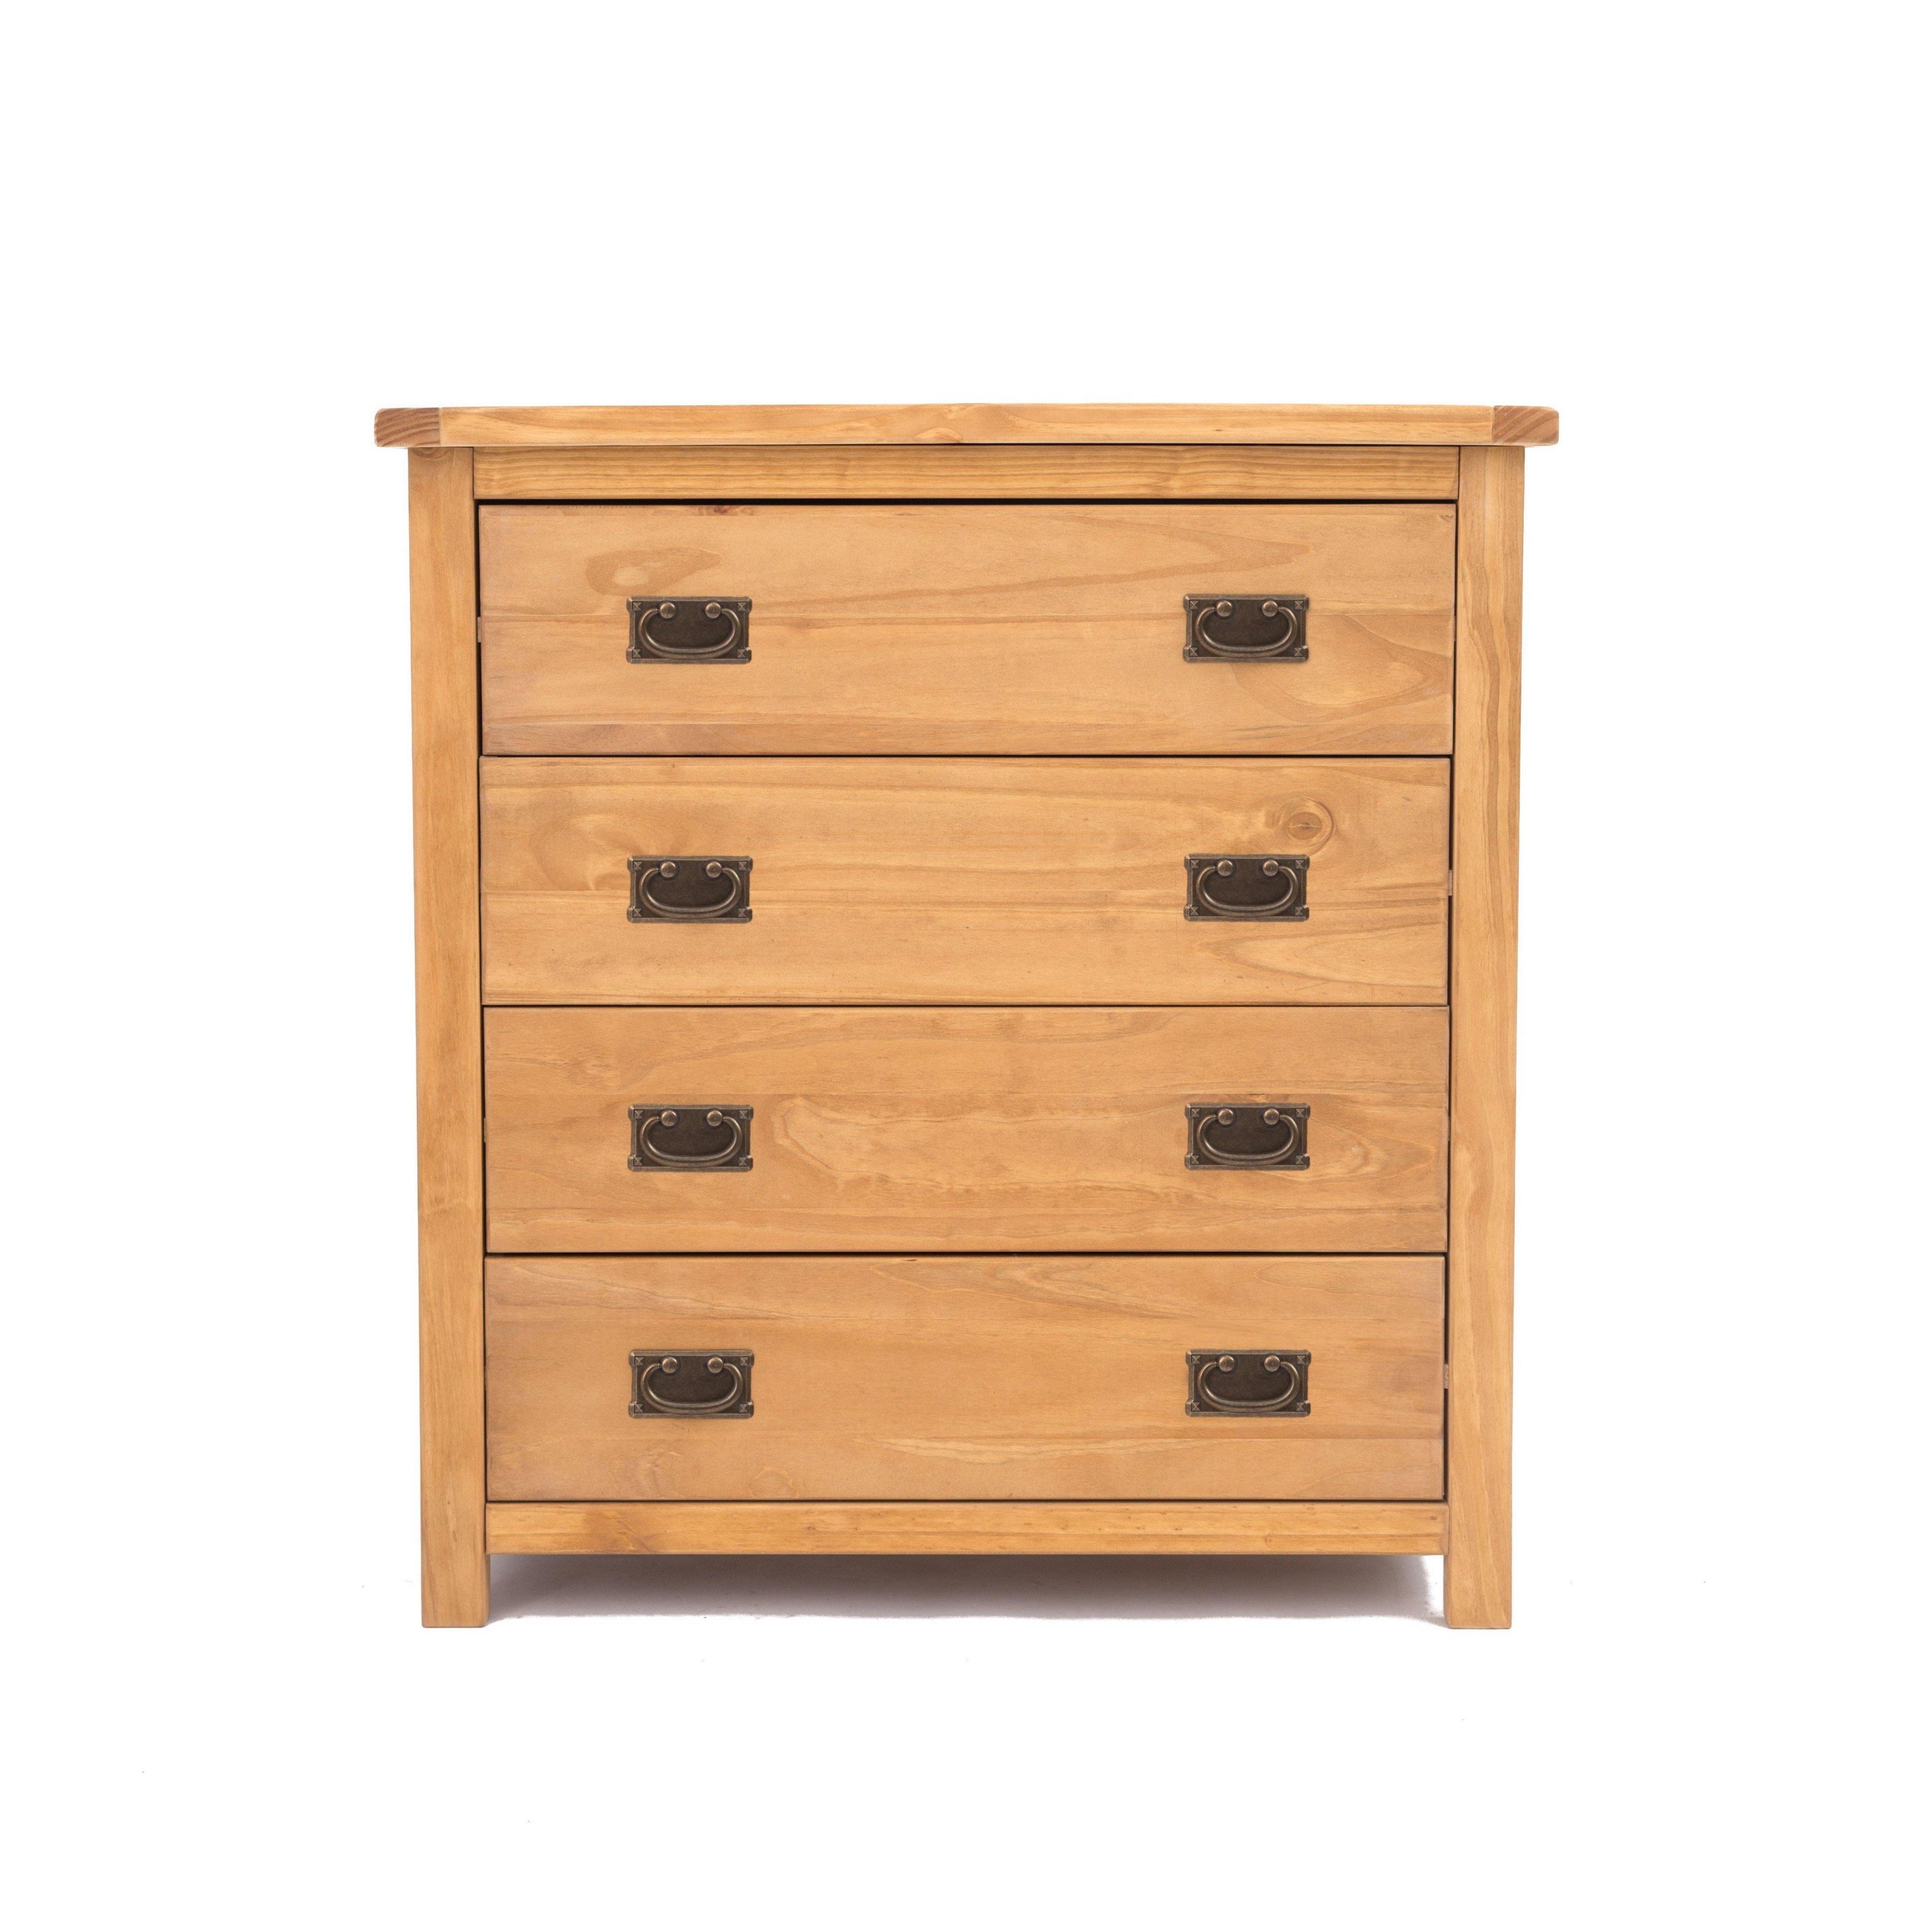 Lugo 4 Drawer Chest of Drawers Bras Drop Handle - image 1